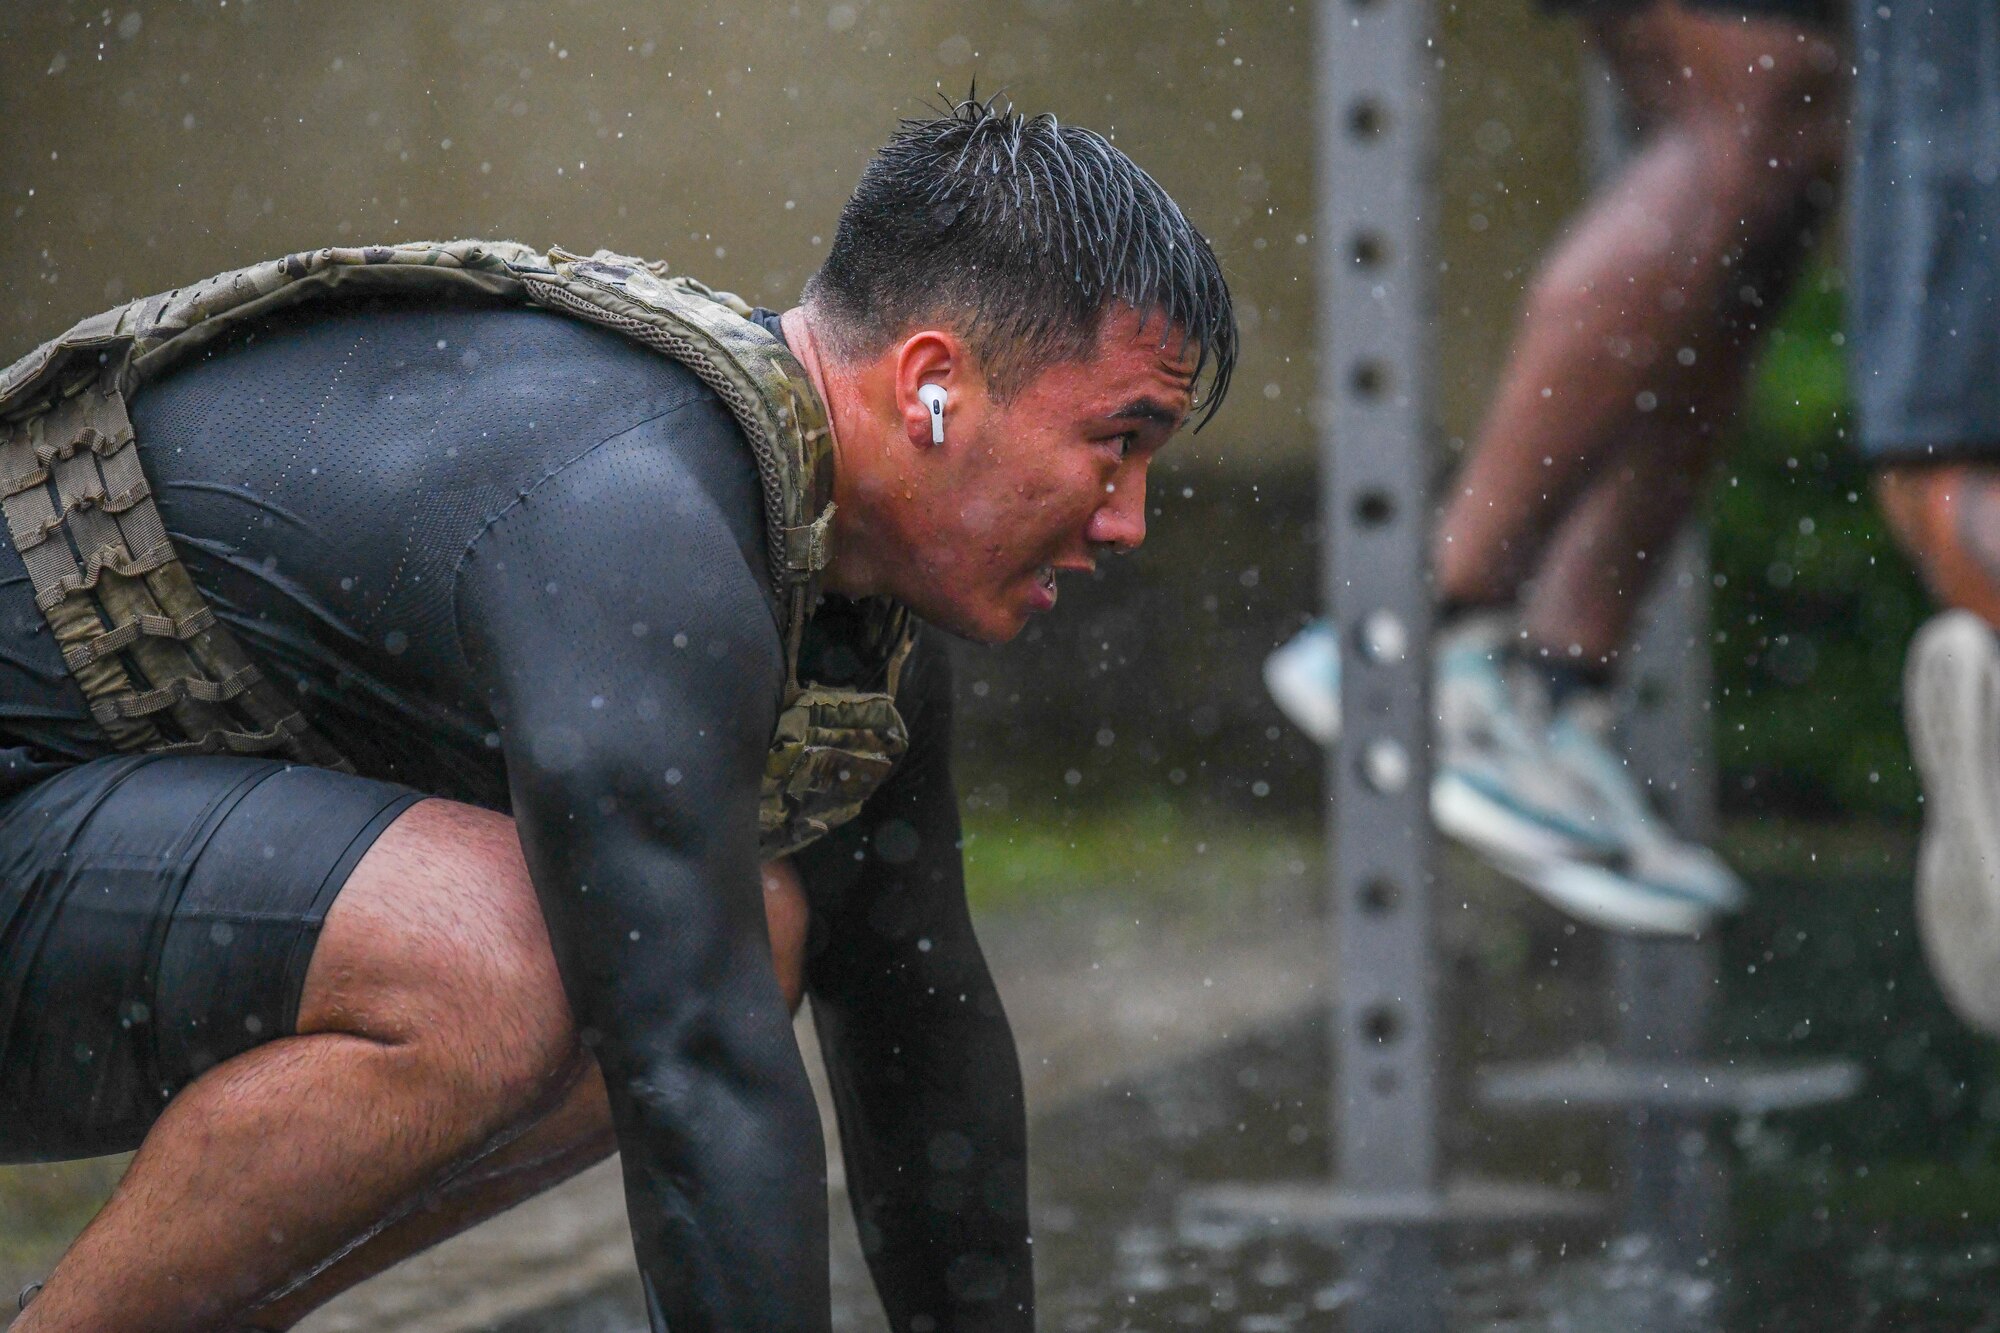 Senior Airman Richard Van, 374th Security Forces Squadron electronic security systems noncommissioned officer in charge, performs squats during a Murph challenge, at Yokota Air Base, Japan, May 27, 2022. The Murph challenge consists of 100 pull-ups, 200 push-ups, 300 squats and a mile run before and after the repetitions, with or without a weighted vest. (U.S. Air Force photo by Staff Sgt. Jessica Avallone)